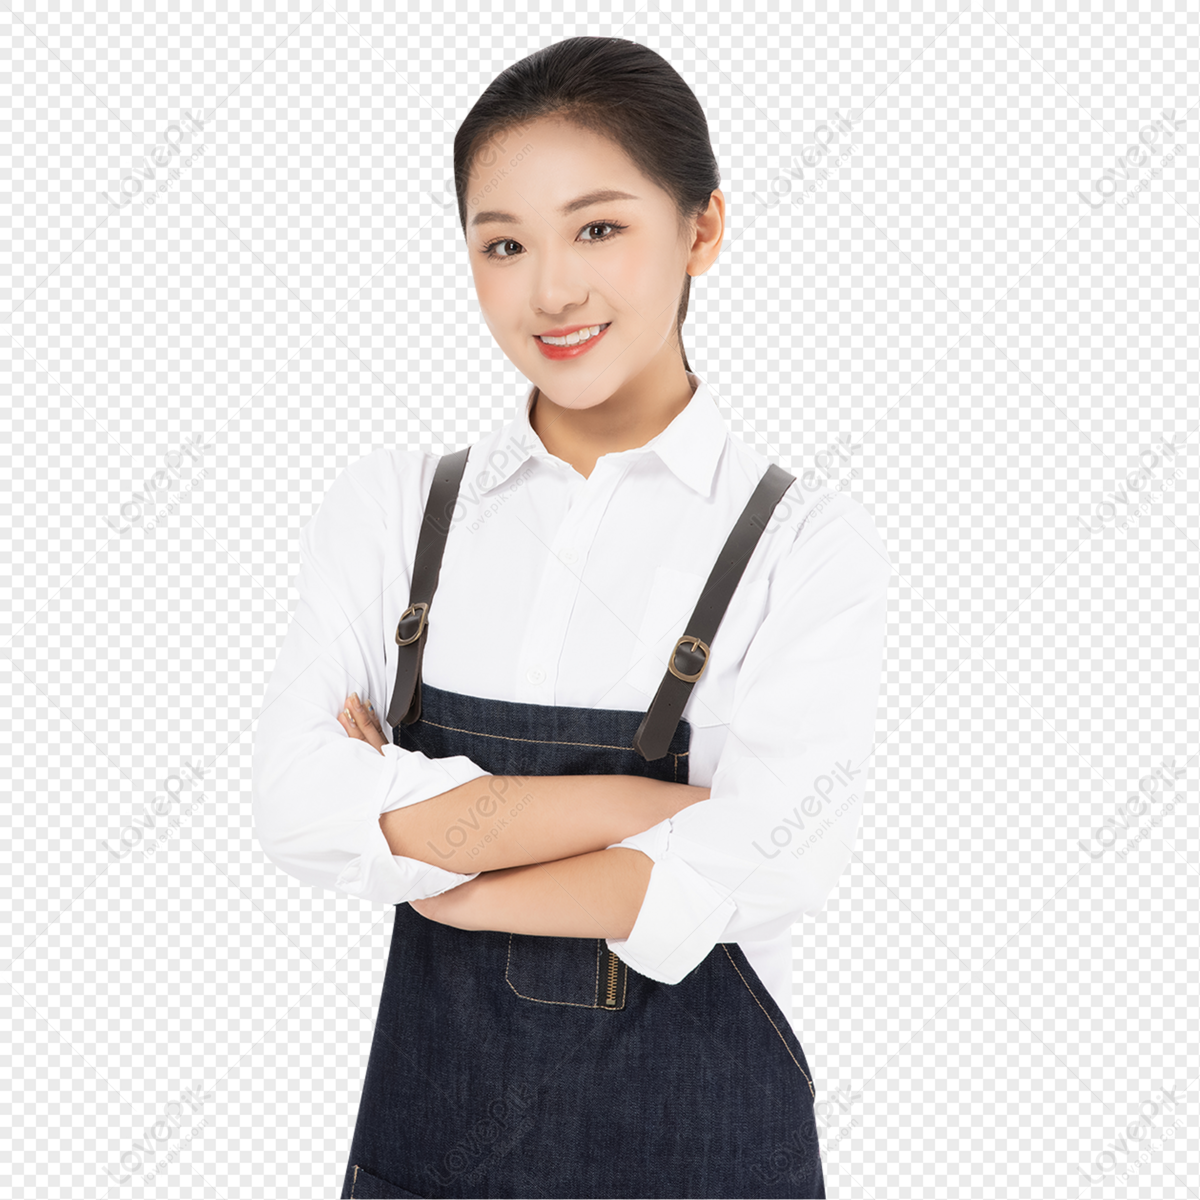 waitress-professional-image-png-free-download-and-clipart-image-for